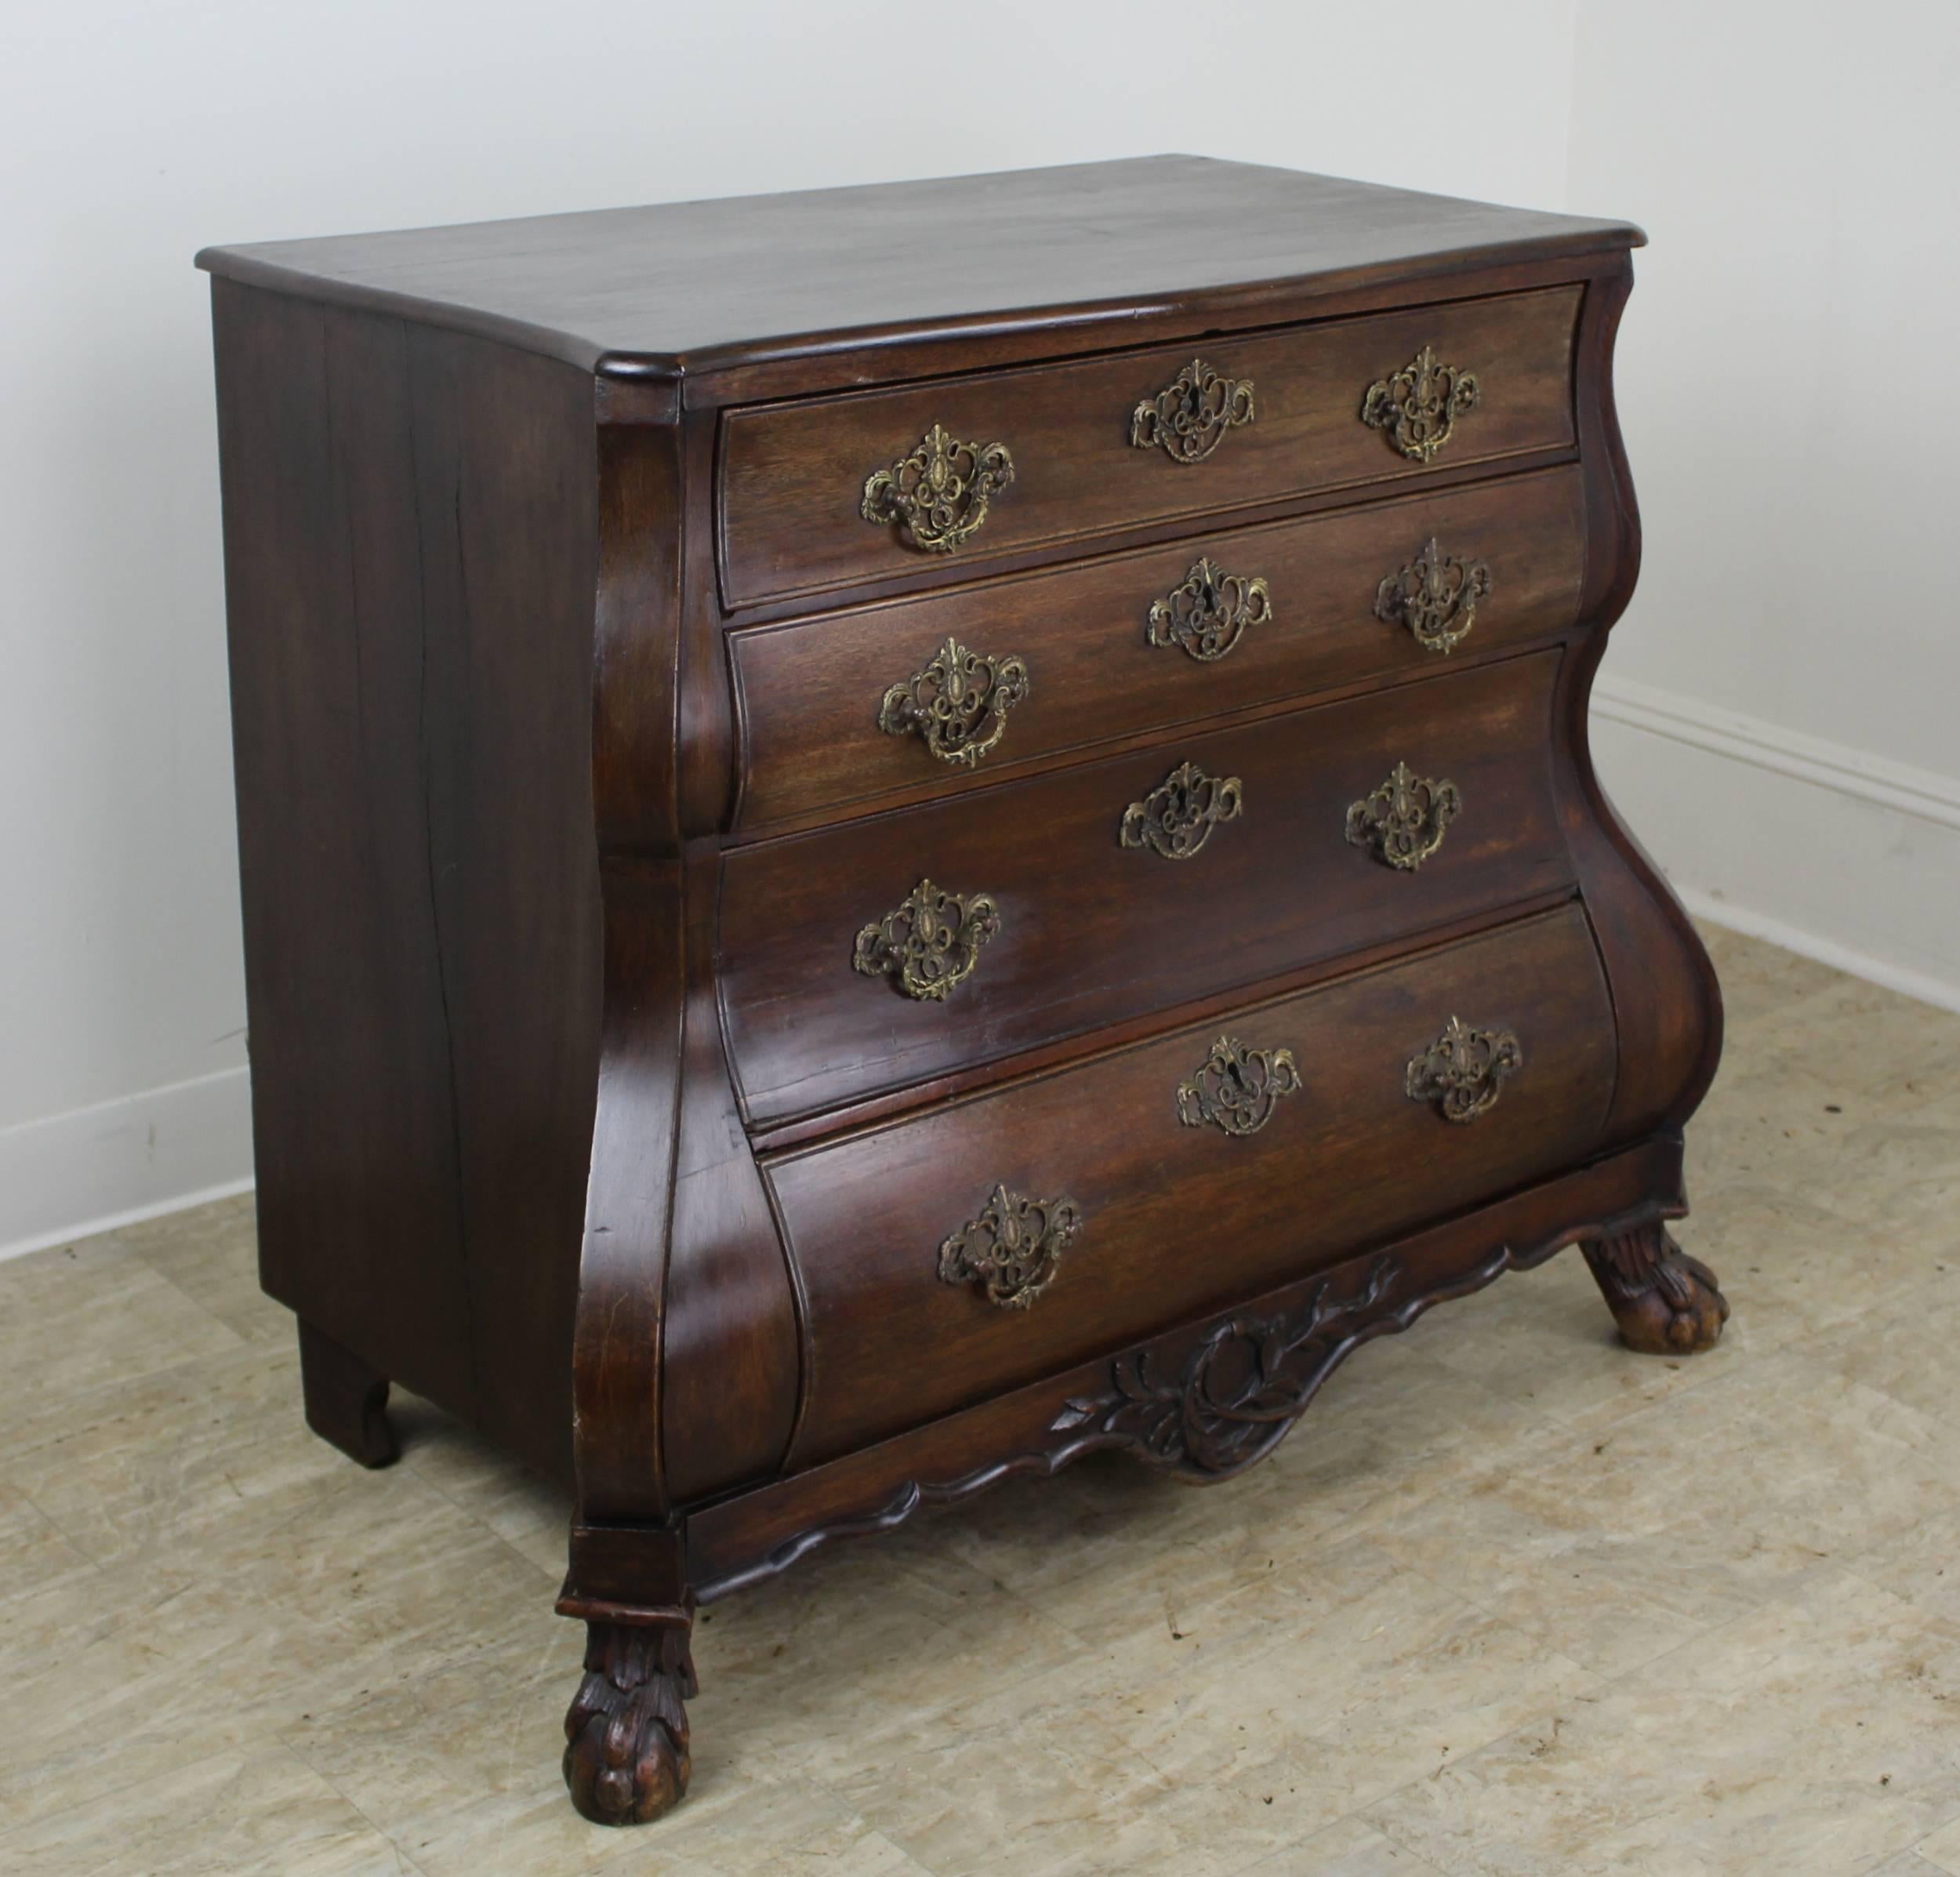 Fabulous early Dutch bombe chest, grand in presence. This four drawer bureau is made of dark oak with a beautiful color and rich patina. Details of note include all original handles, shaped and decoratively carved apron on the front, and gently